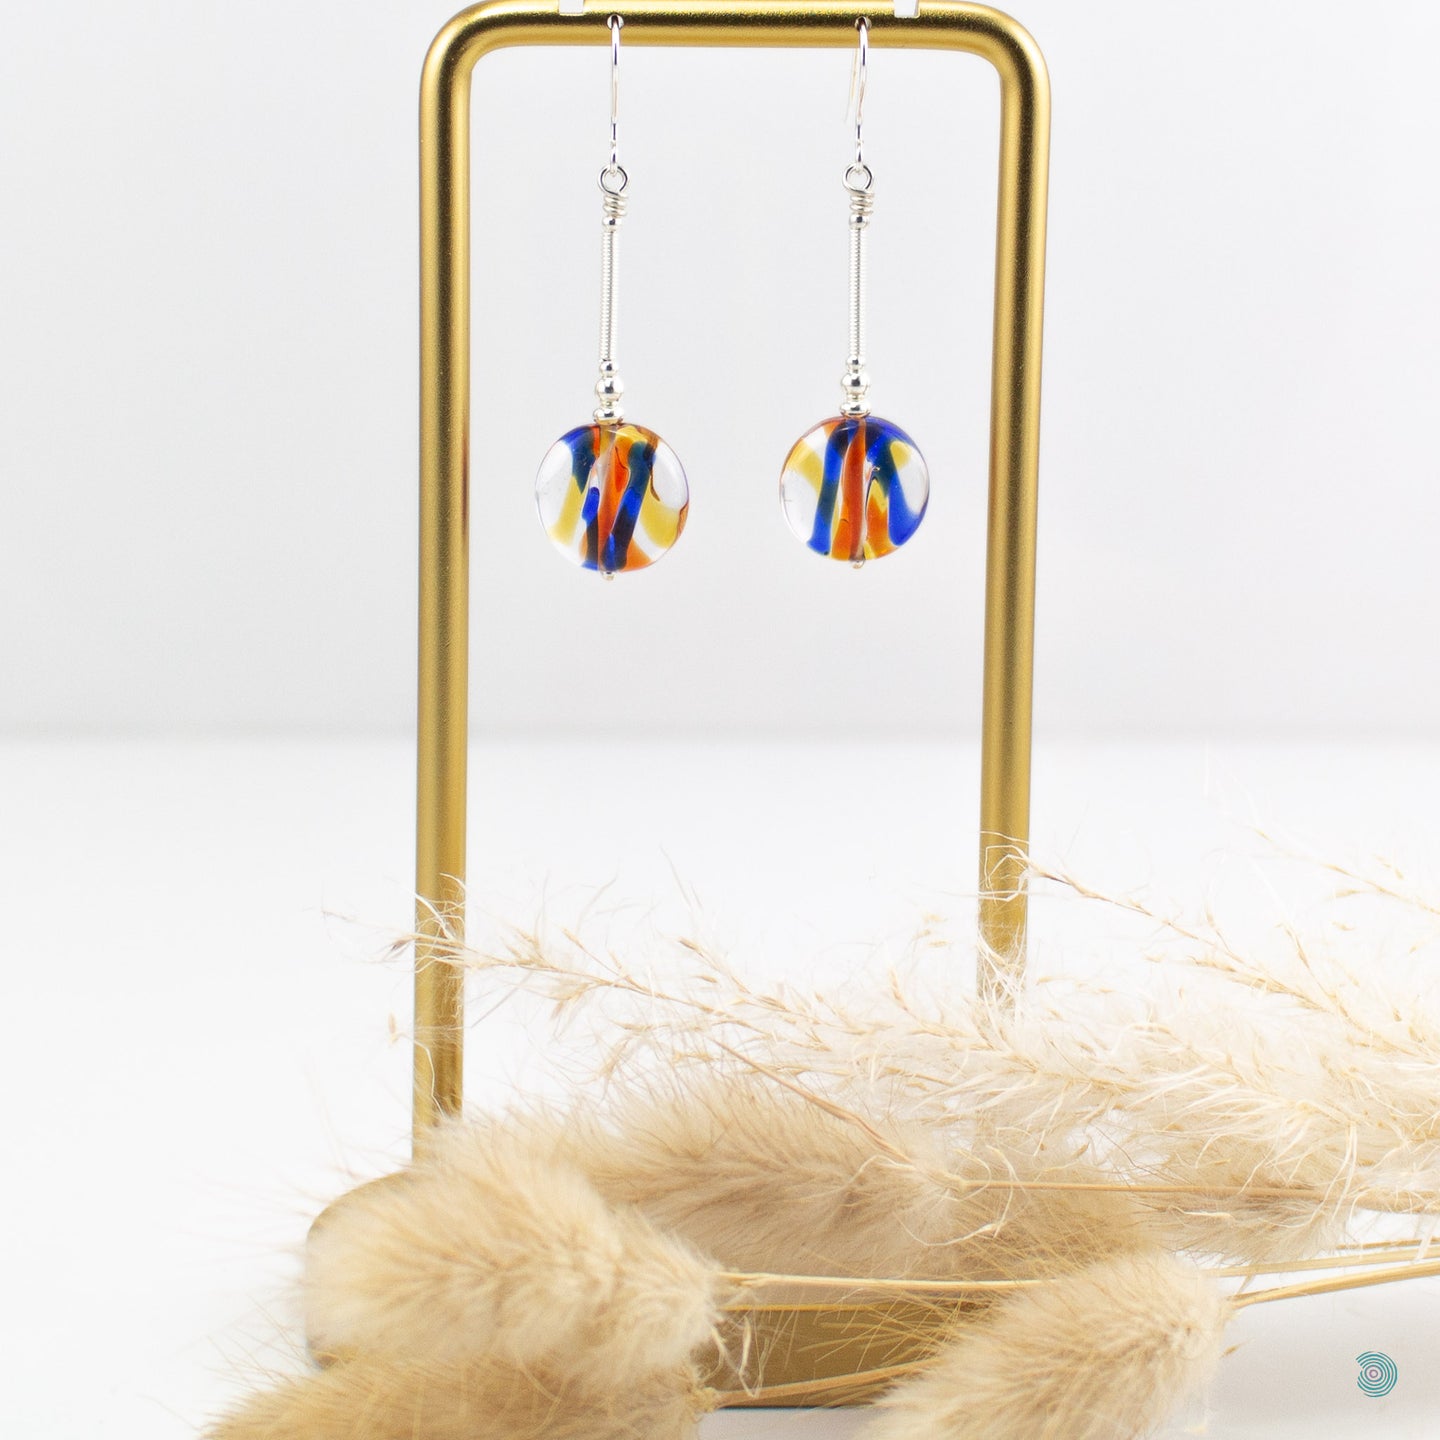 Colourful summer drop earrings, with hand wrapped silver filled tubes, sterling silver bead and ear wire detail with beautiful lamp work glass beads in a mix of reds/blues and yellows.  These earrings are 3.5cm in drop length from the base of the ear wires and come with backs included.  They come presented in a pretty gift box for safe keeping or making them perfect for gift giving  Designed and Handmade in Dingle 